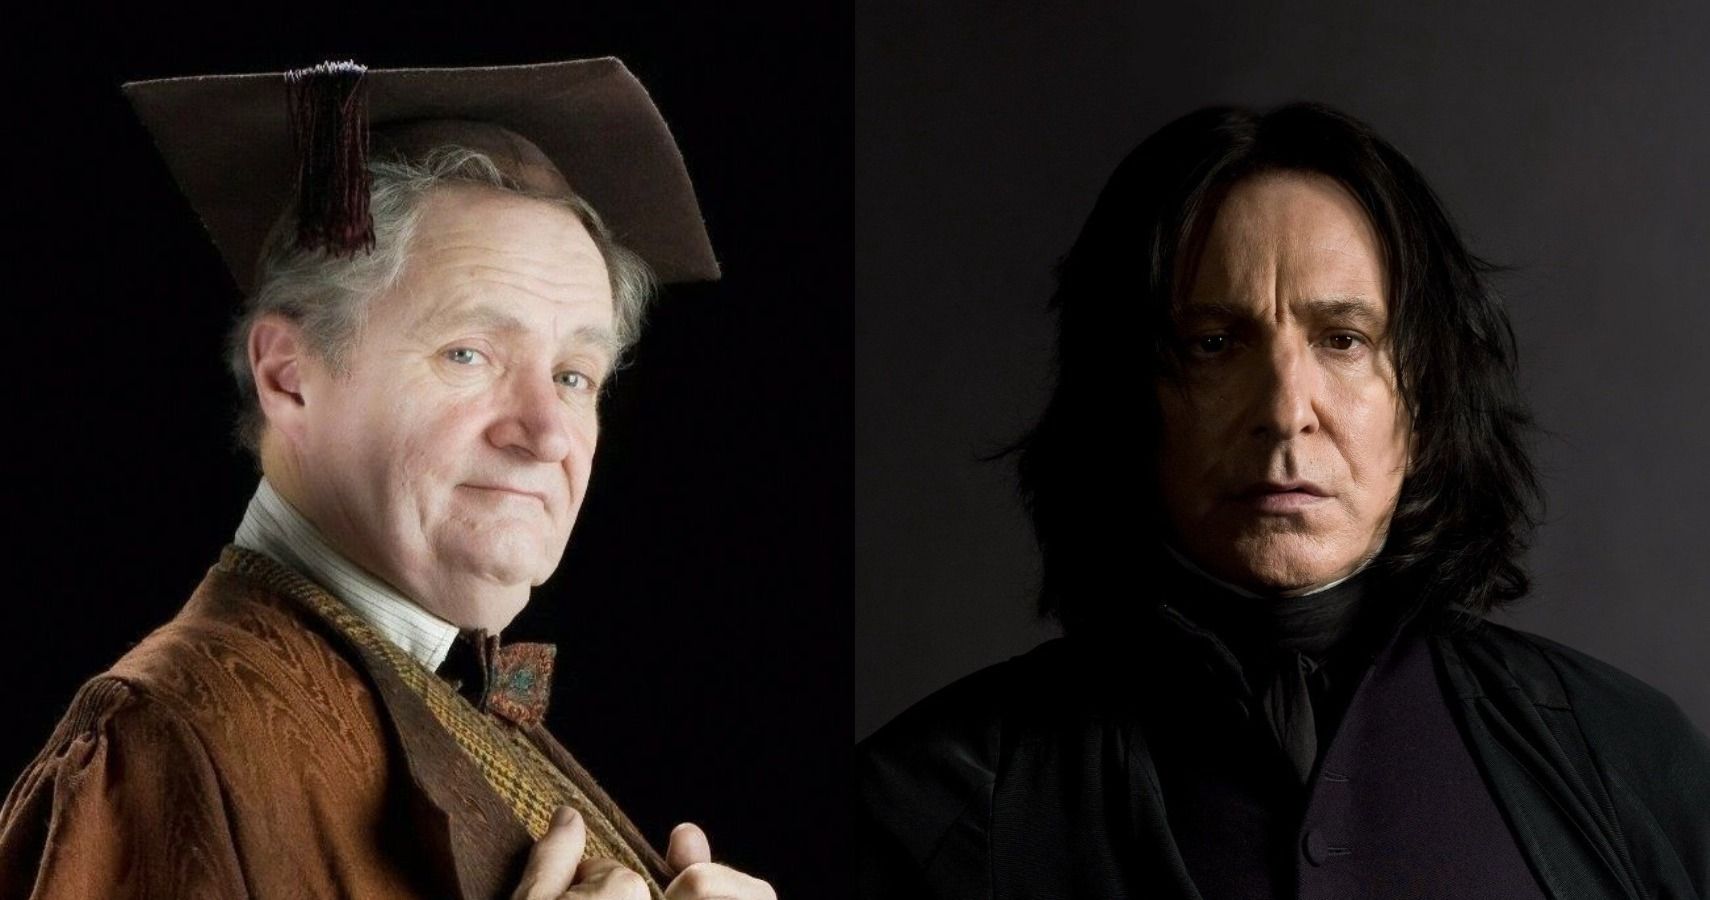 A collage showing Hogwarts Potions Master Horace Slughorn and Severus Snape from the Harry Potter franchise